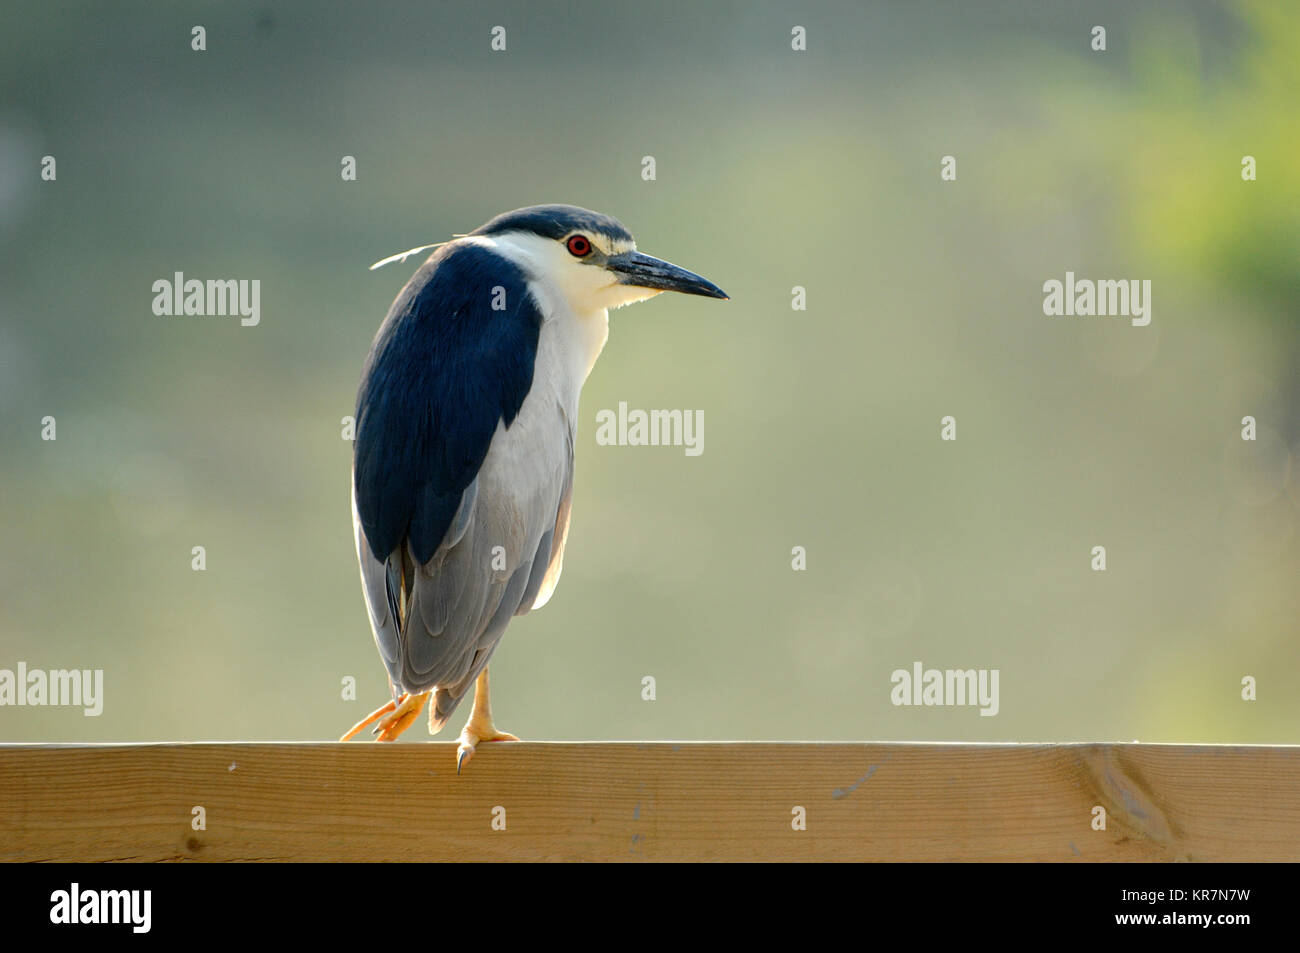 Night Heron, Nycticorax nycticorax, Perched on Wooden Fence, Camargue, Provence, France Stock Photo